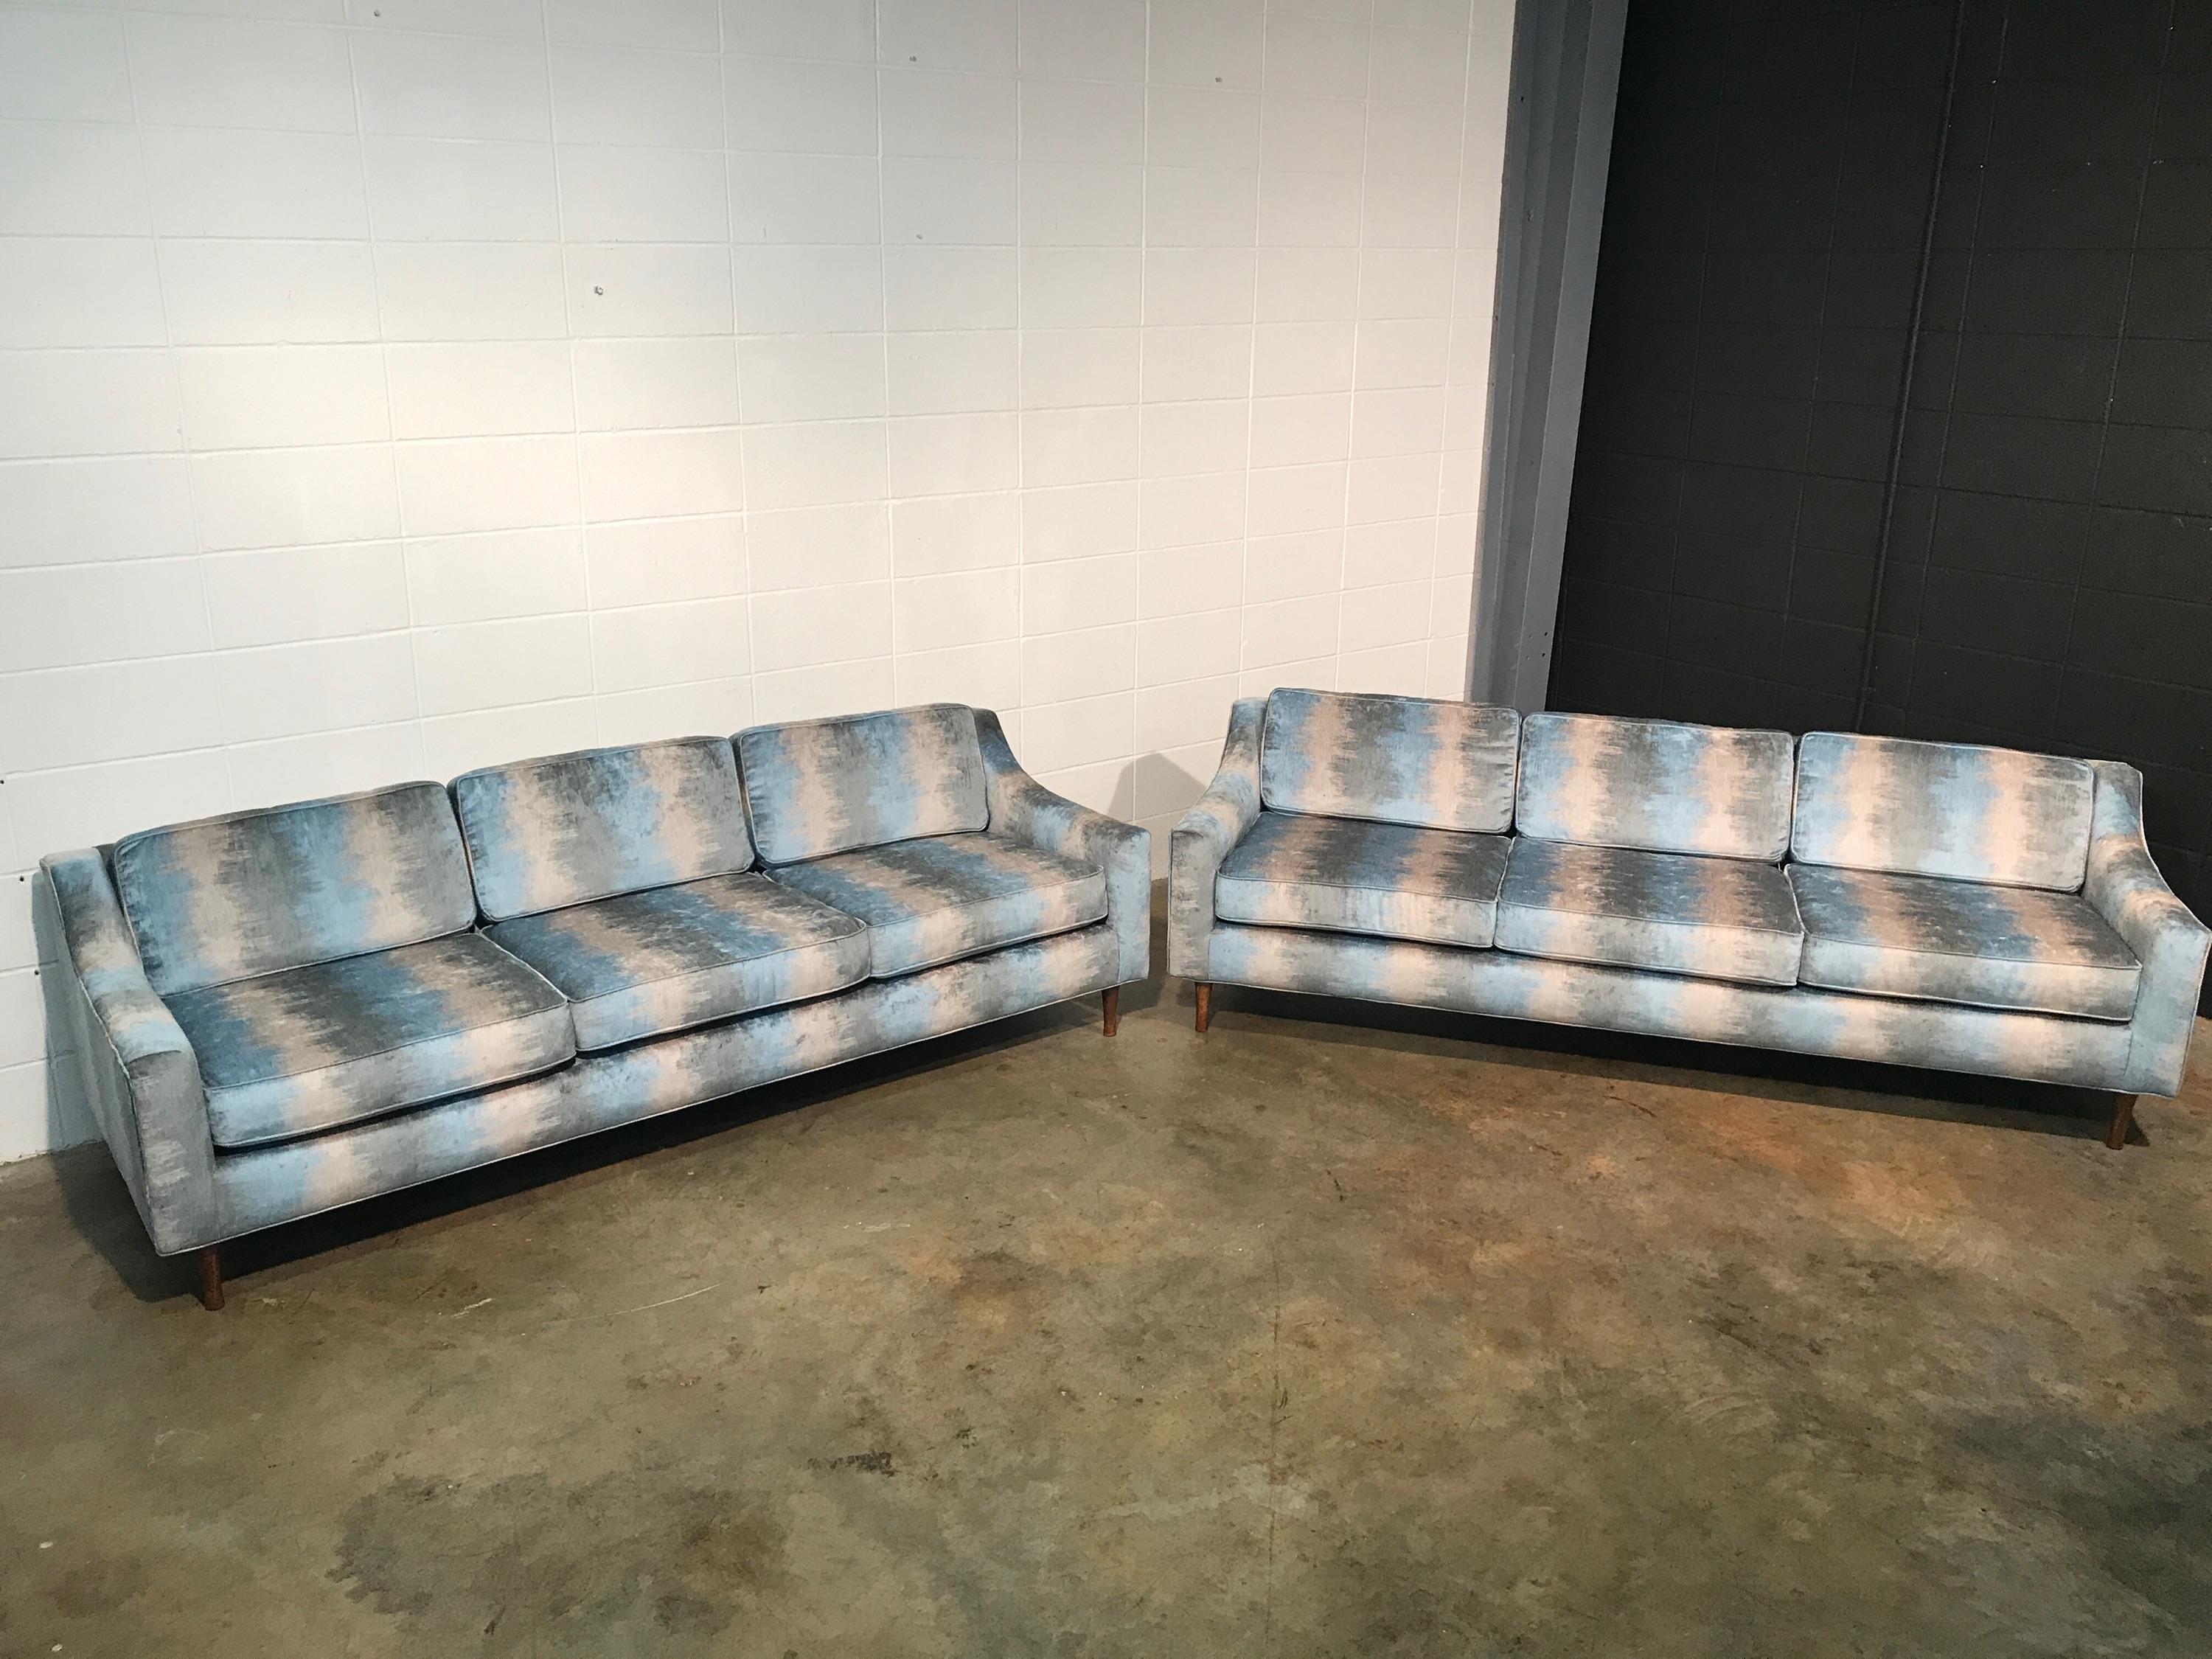 Matching pair of fully restored Mid-Century Modern vintage sofas.
Full restoration includes all new high density foam, new fabric, and wooden legs refinished. Fabric is a Flame Stitch style pattern that is mostly blue and gray in color. See photo